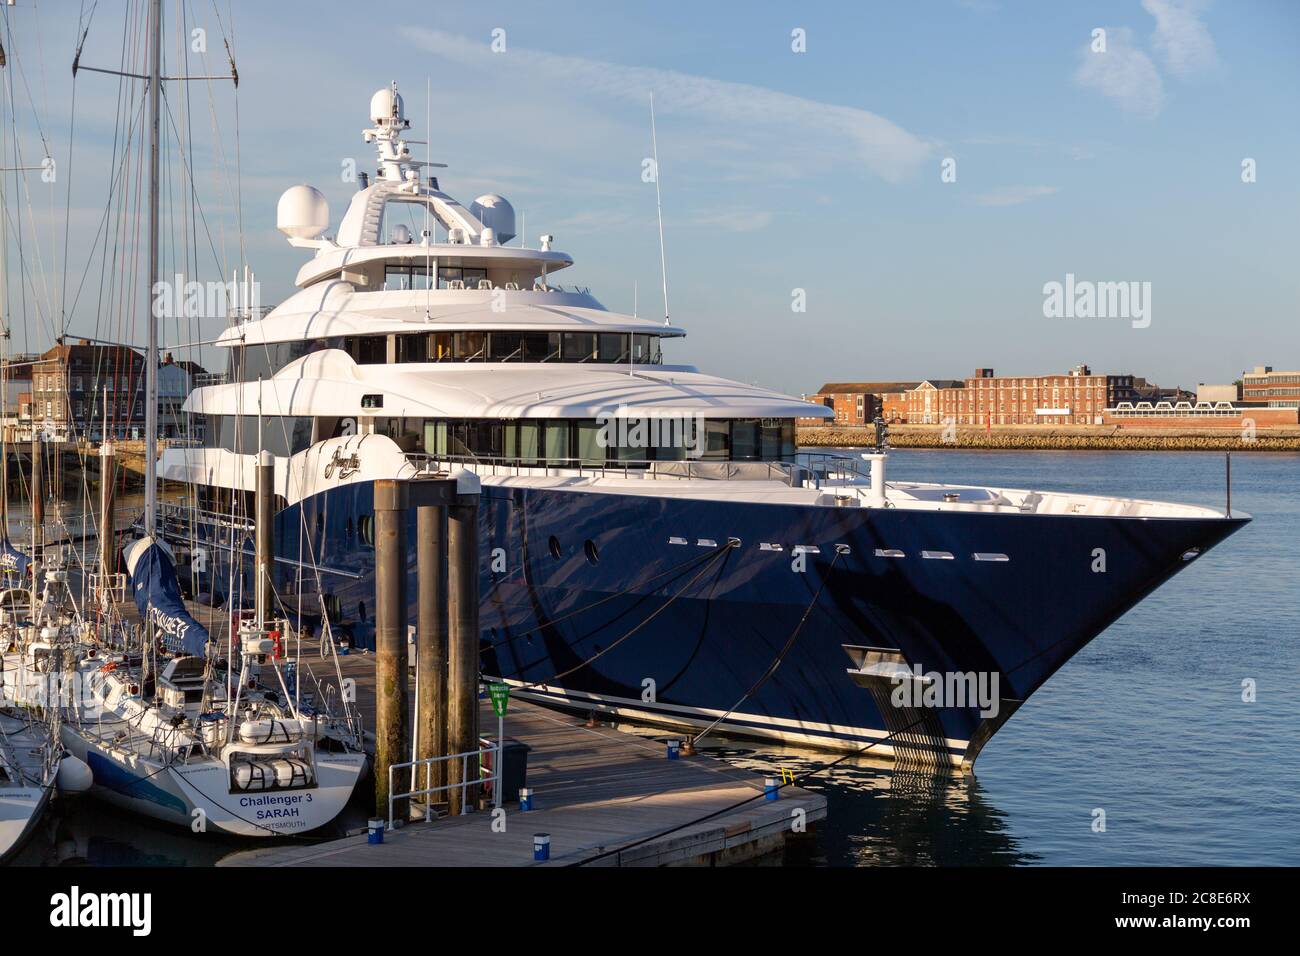 A multi million pound yacht or super yacht berthed at a Gunwharf quays marina Stock Photo